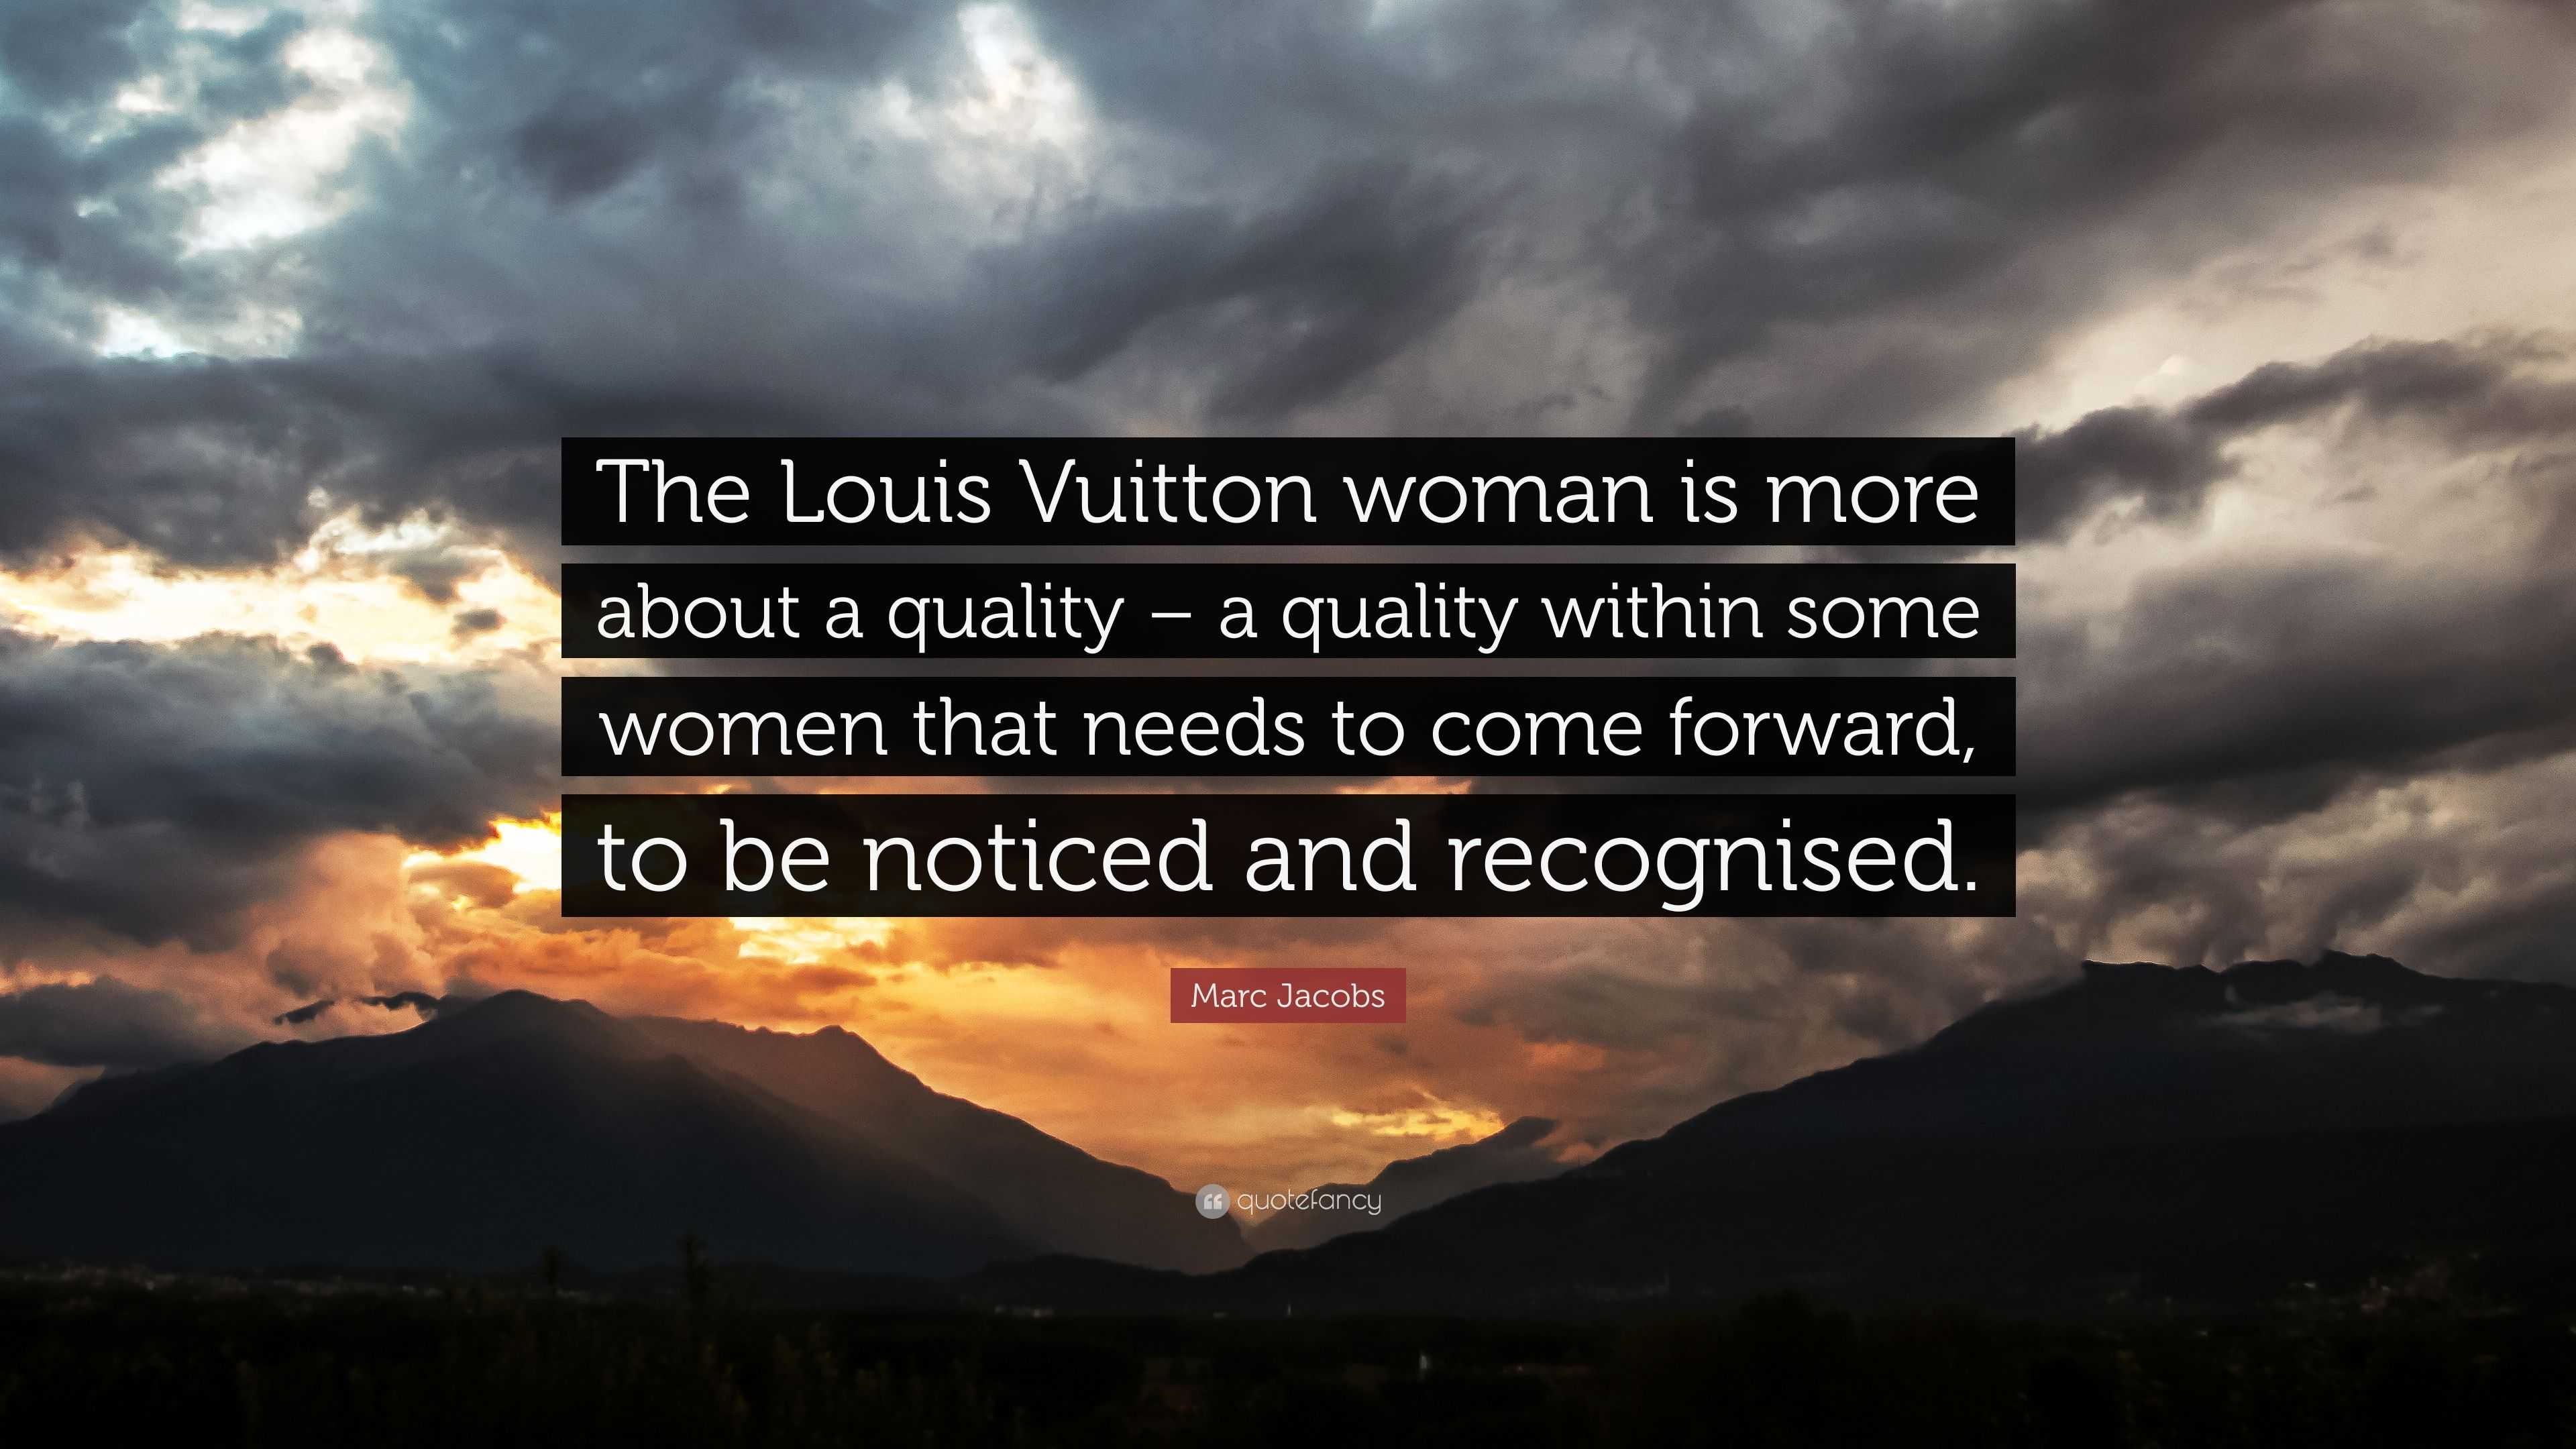 The Louis Vuitton woman is more about a quality — a quality within